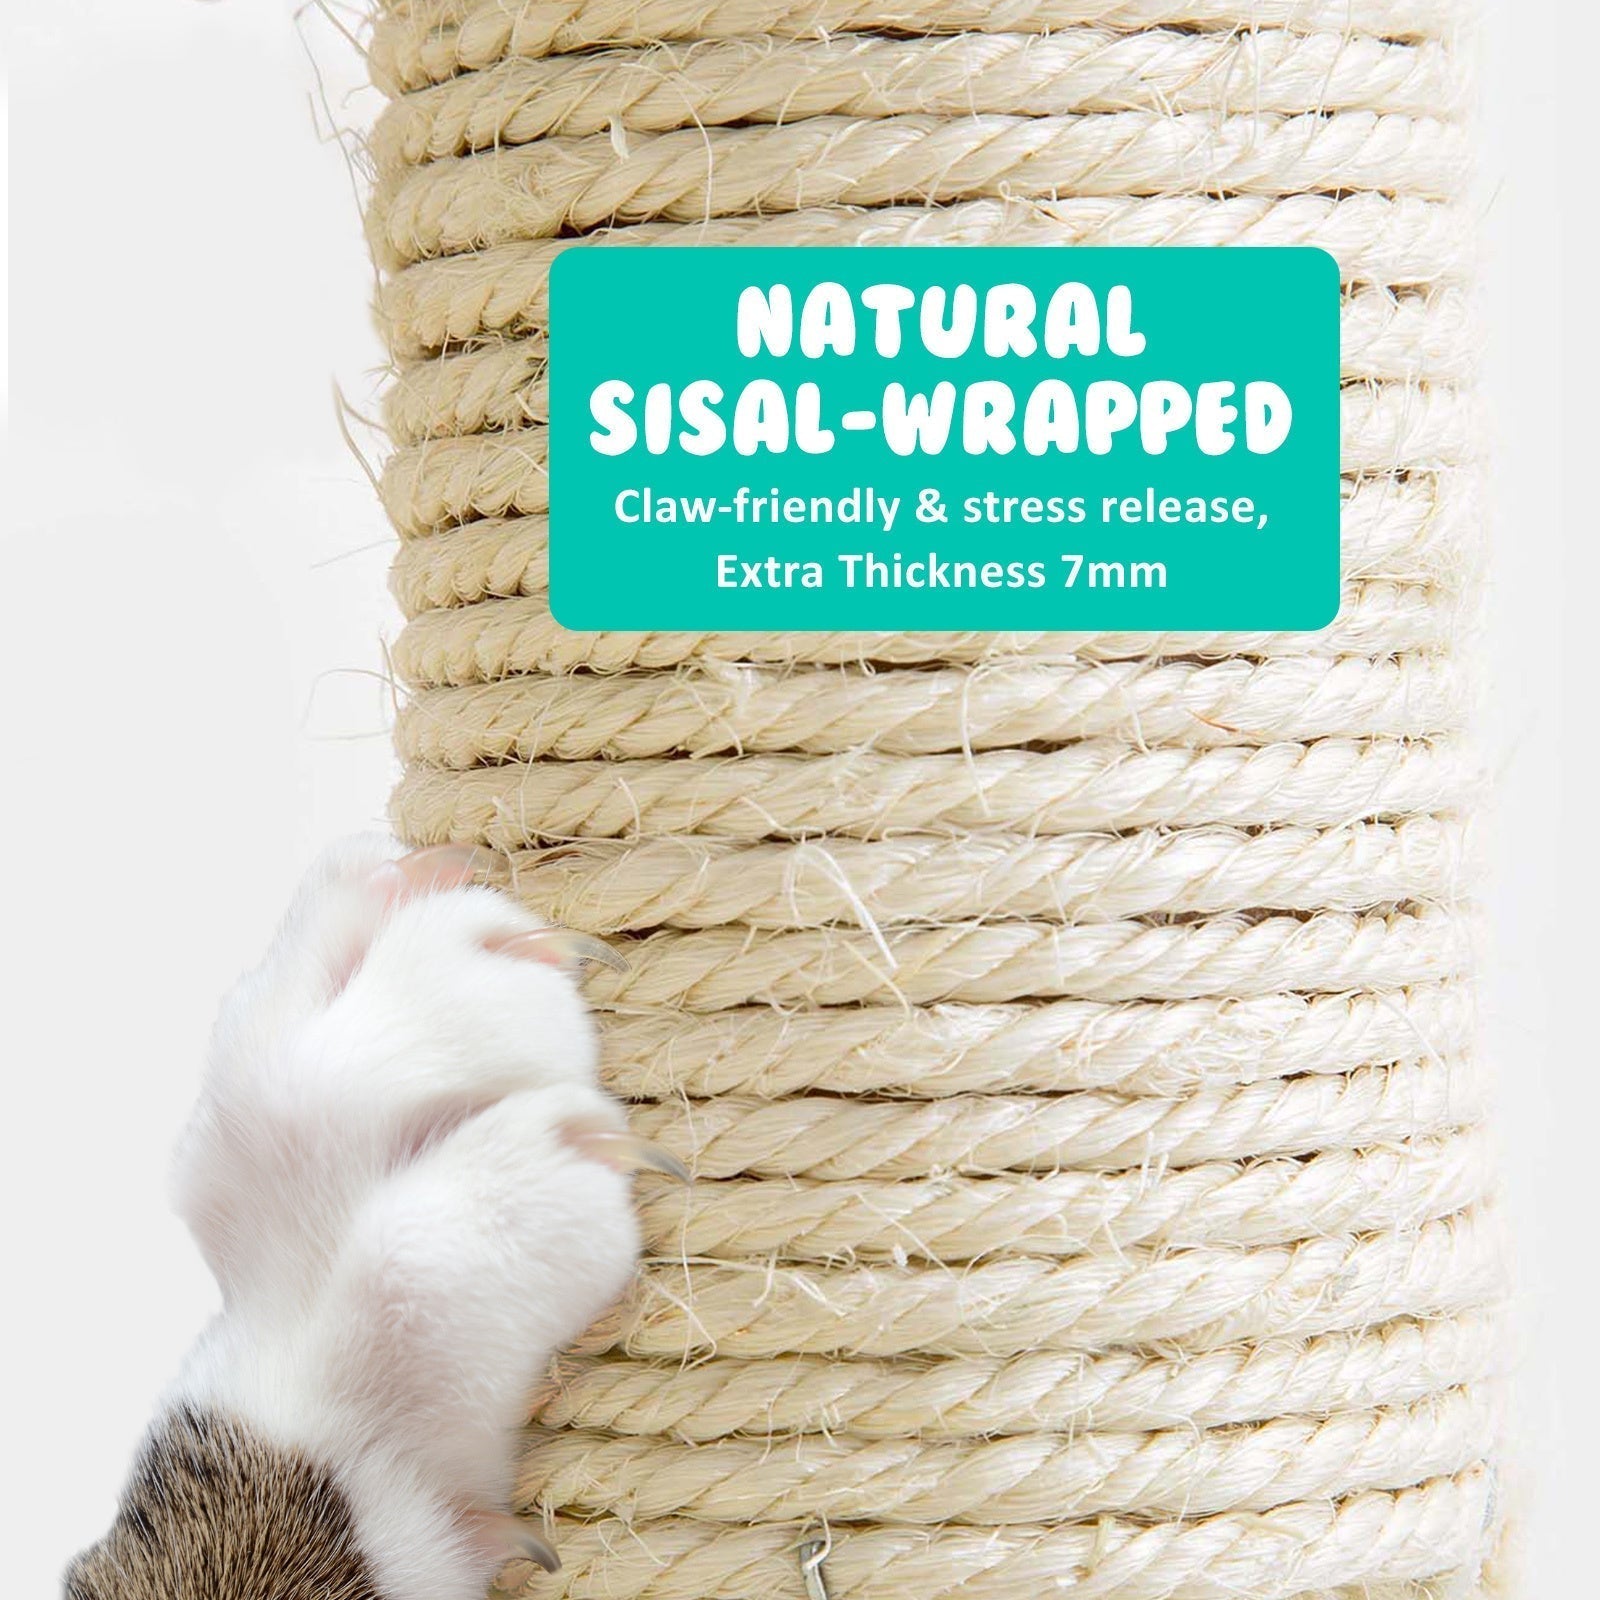 Paw Mate 143cm Grey Cat Tree CATOPIA Sisal Scratching Post Scratcher Pole Condo House Tower Cares Fast shipping On sale